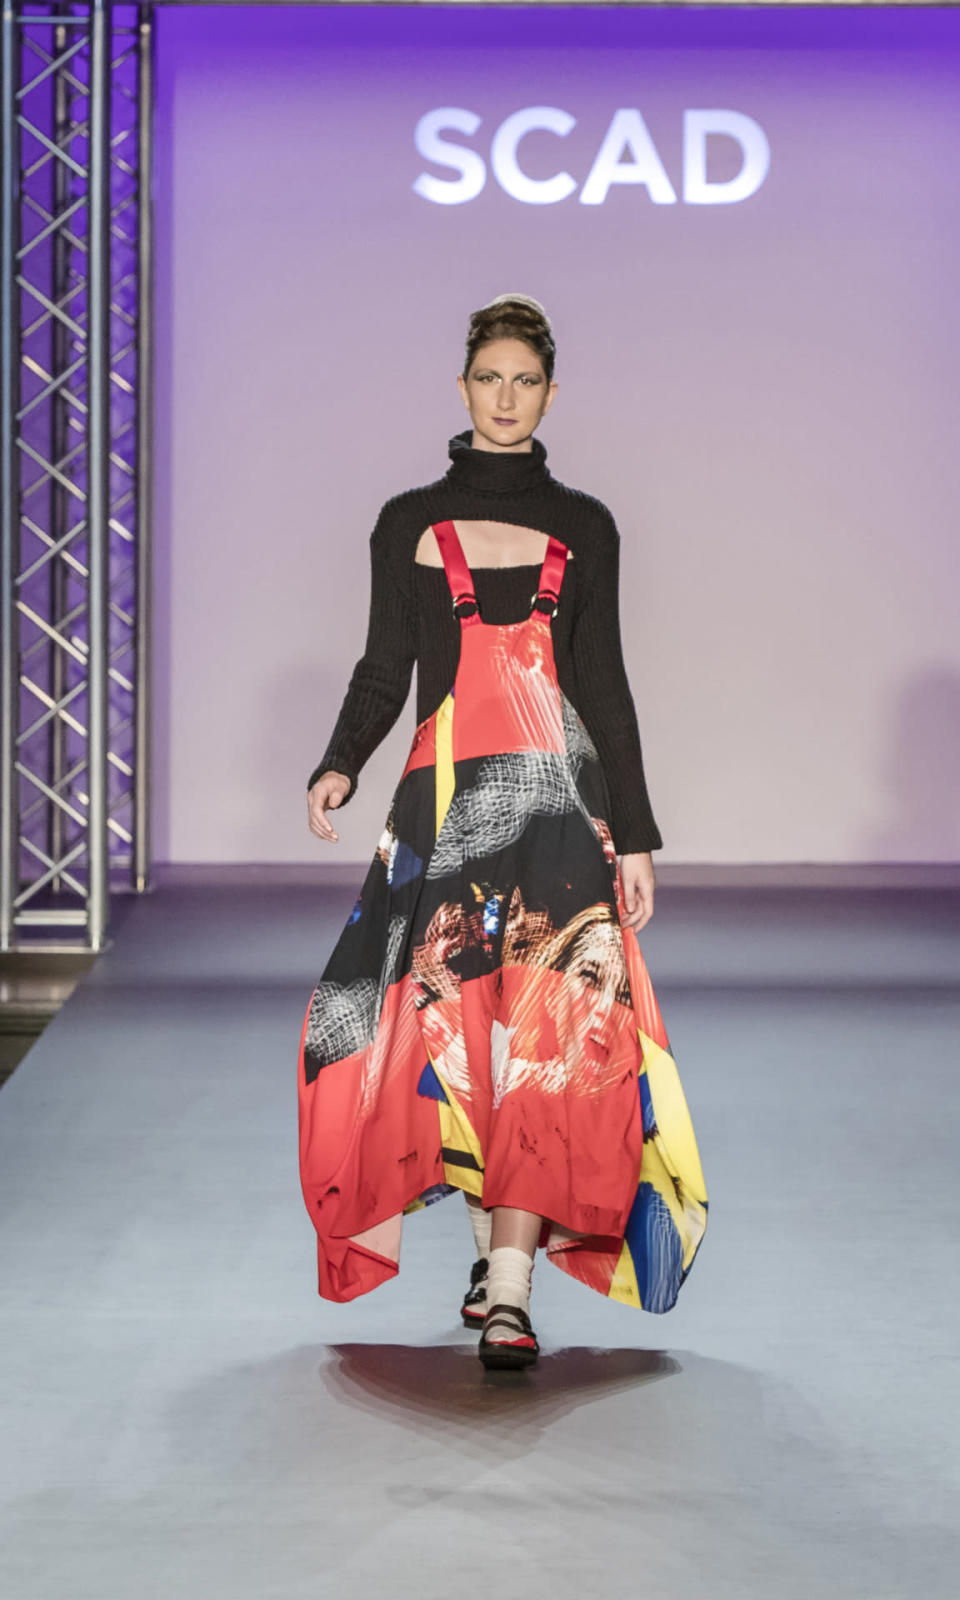 SCAD graduate Kelly Valbuena Marquez’s designs featured forward-thinking takes on knitwear — not to mention some of the coolest prints we’ve seen.